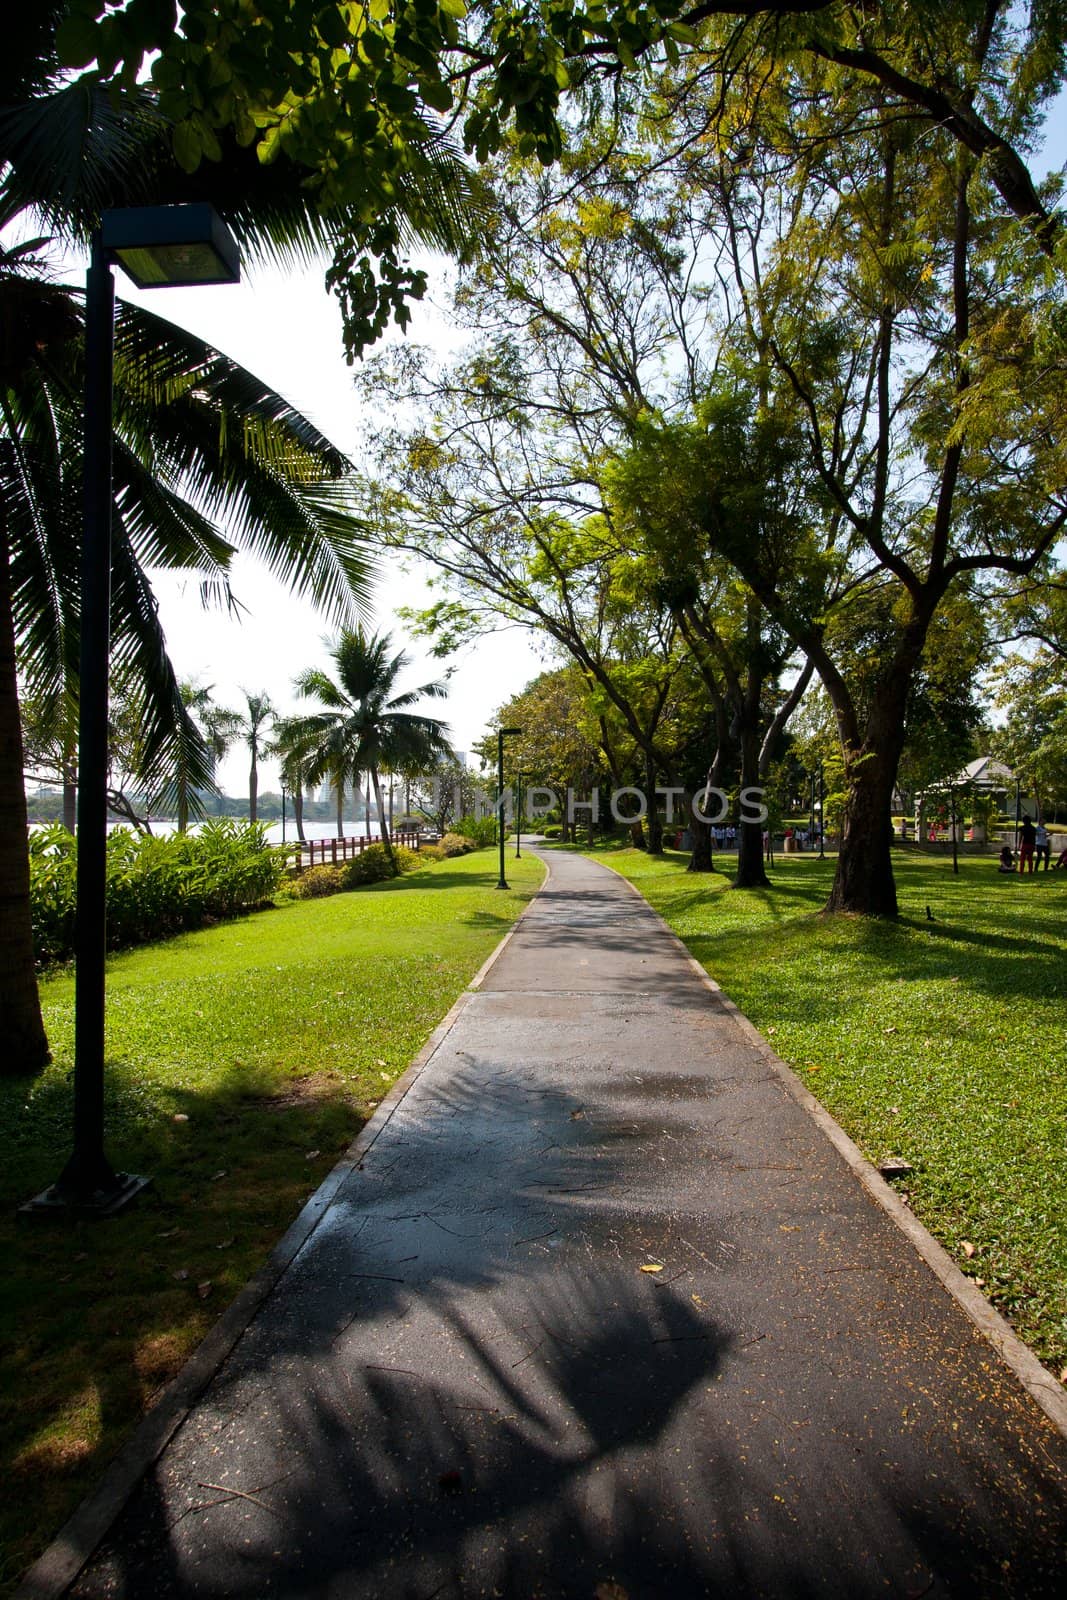 The rest walk in the park with tall trees and green lawns. Fresh in your holiday.